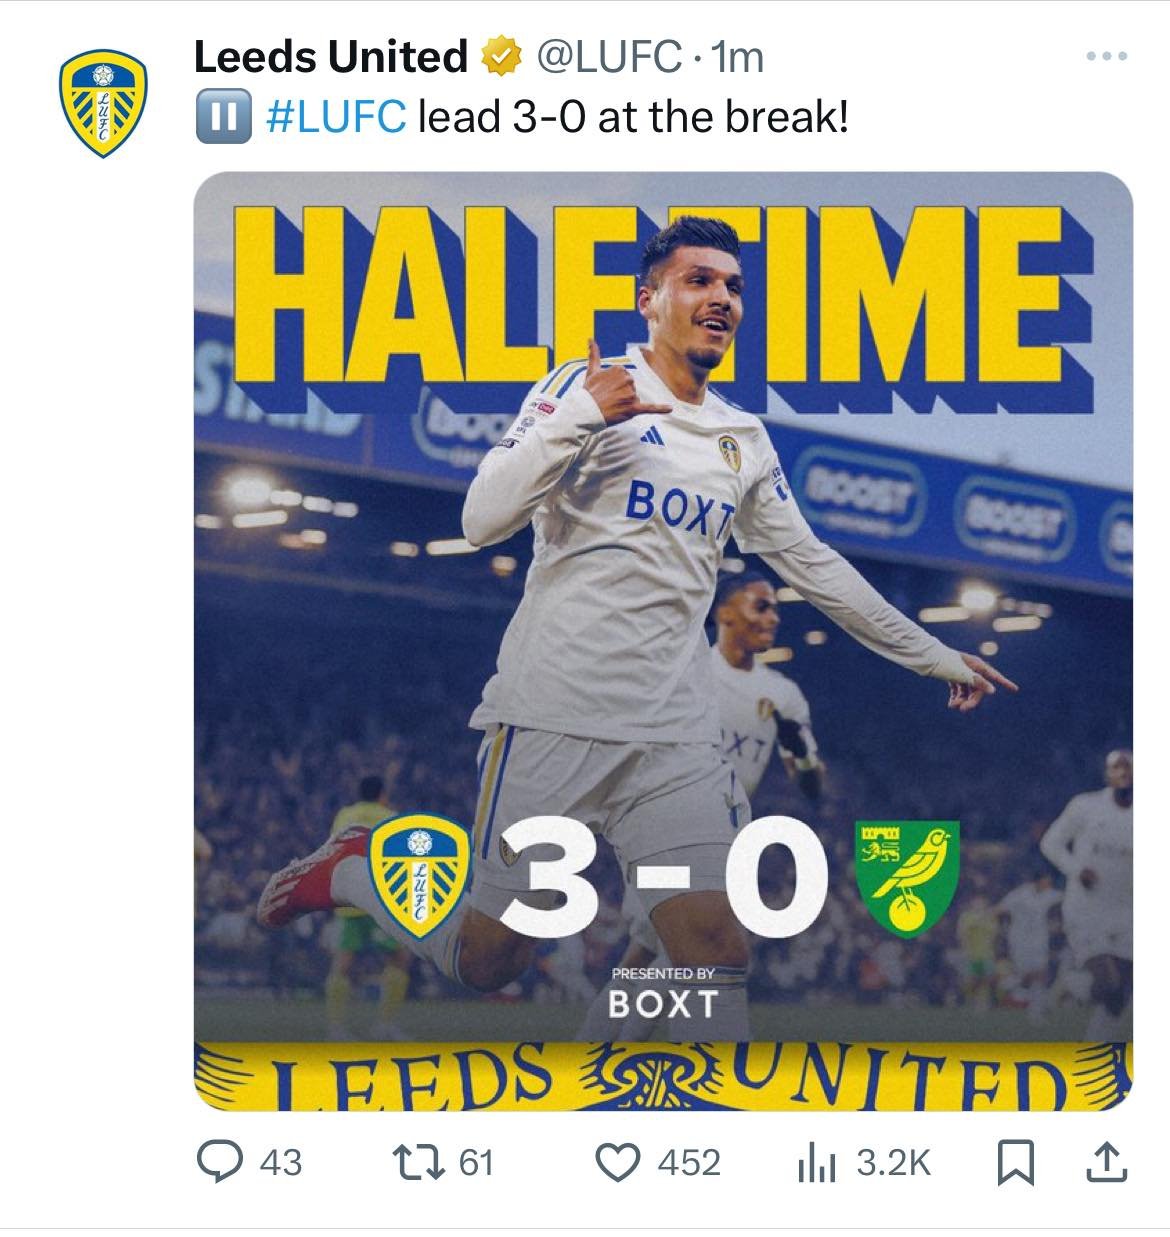 We&rsquo;ll take that. #lufc